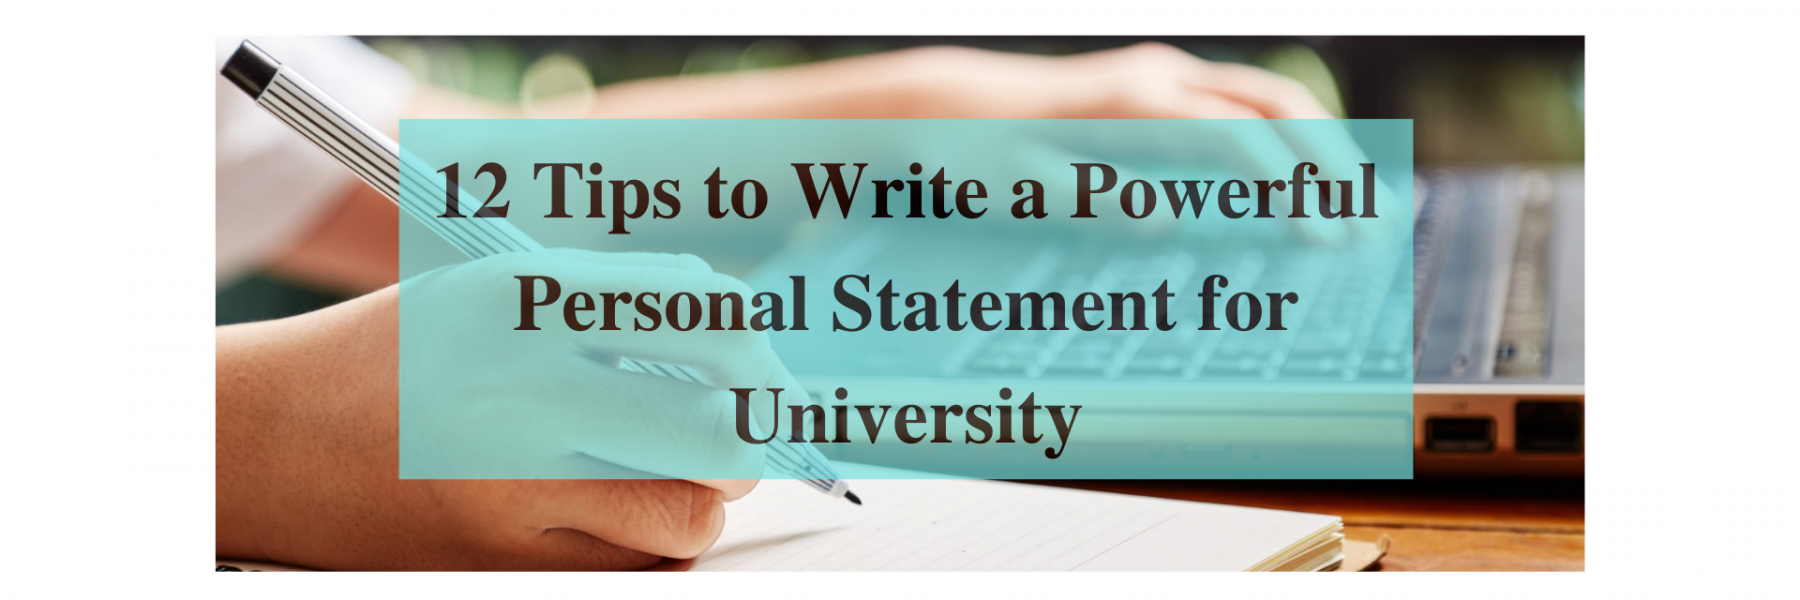 Tips to write a powerful personal statement for university